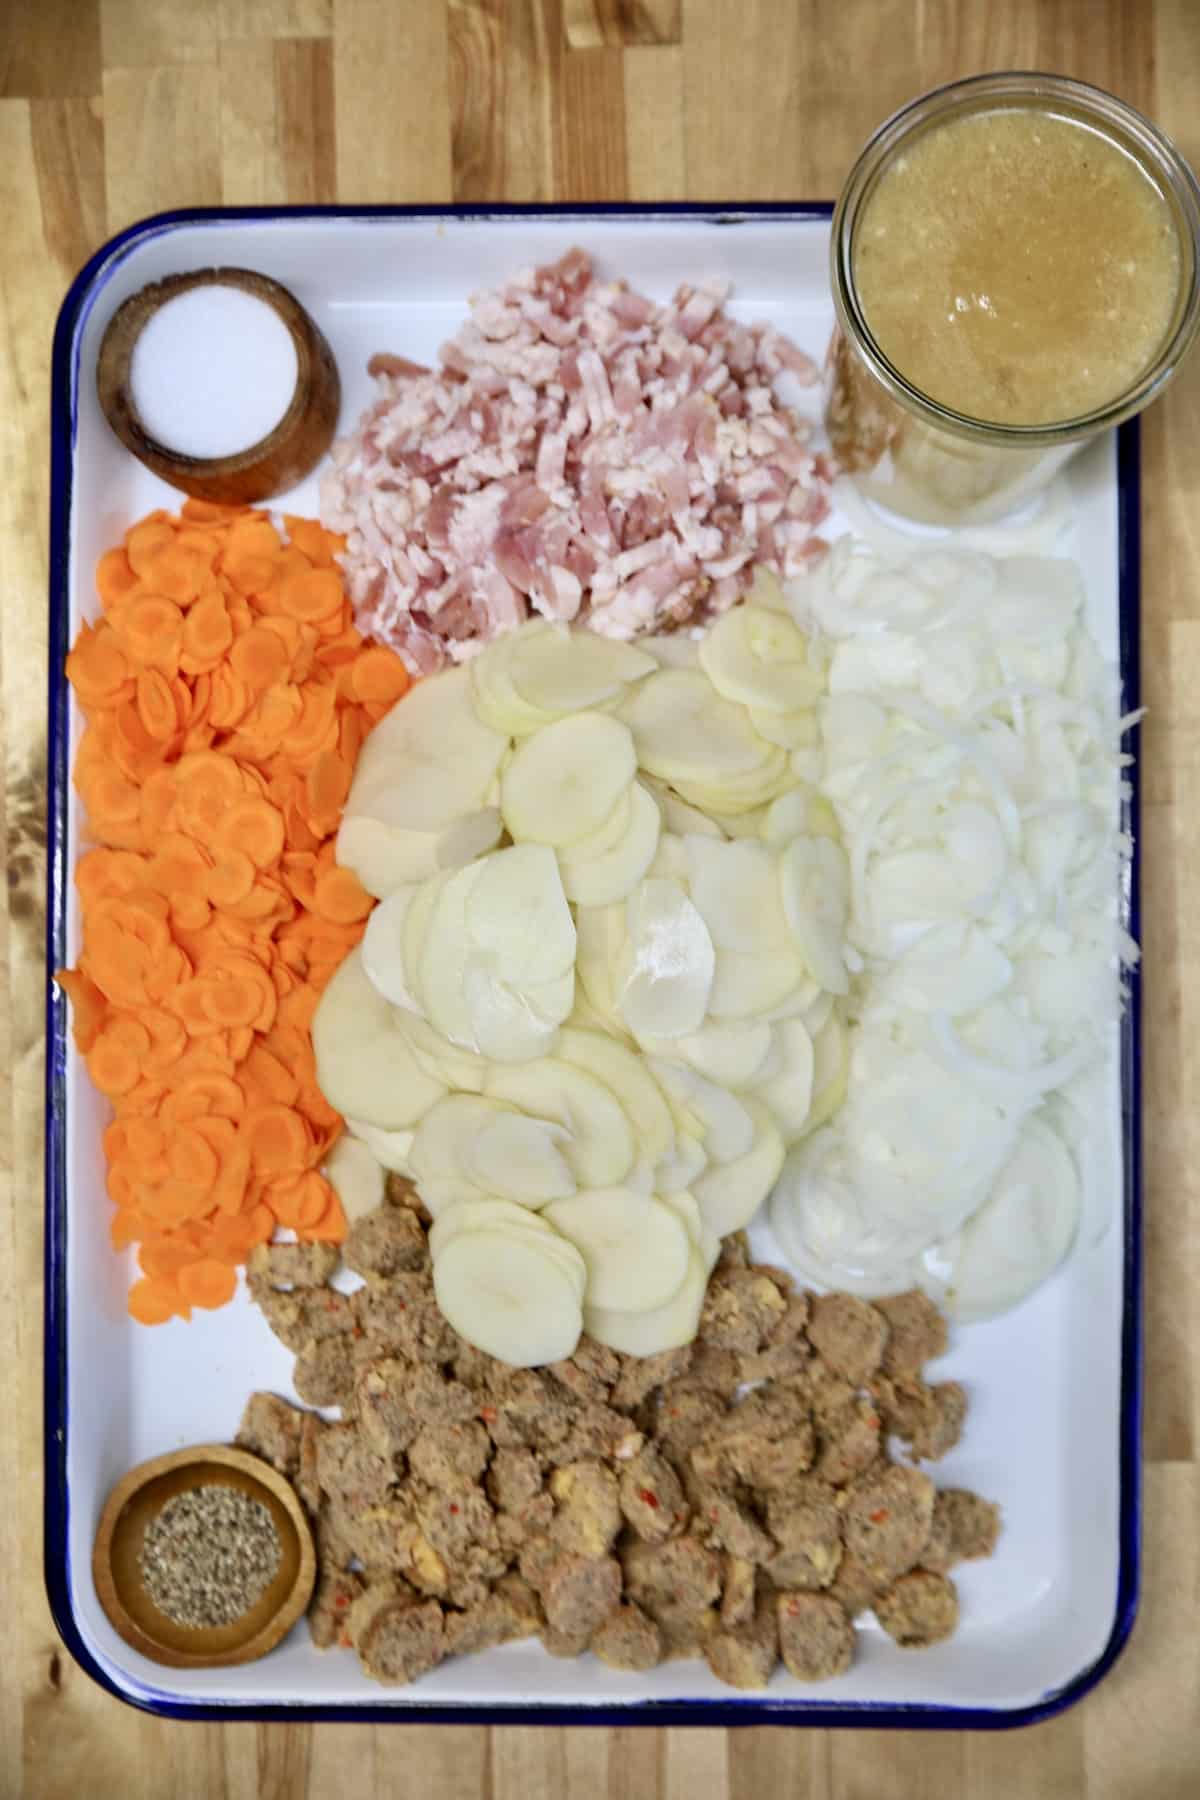 Platter with ingredients for Dublin Coddle Irish Stew.